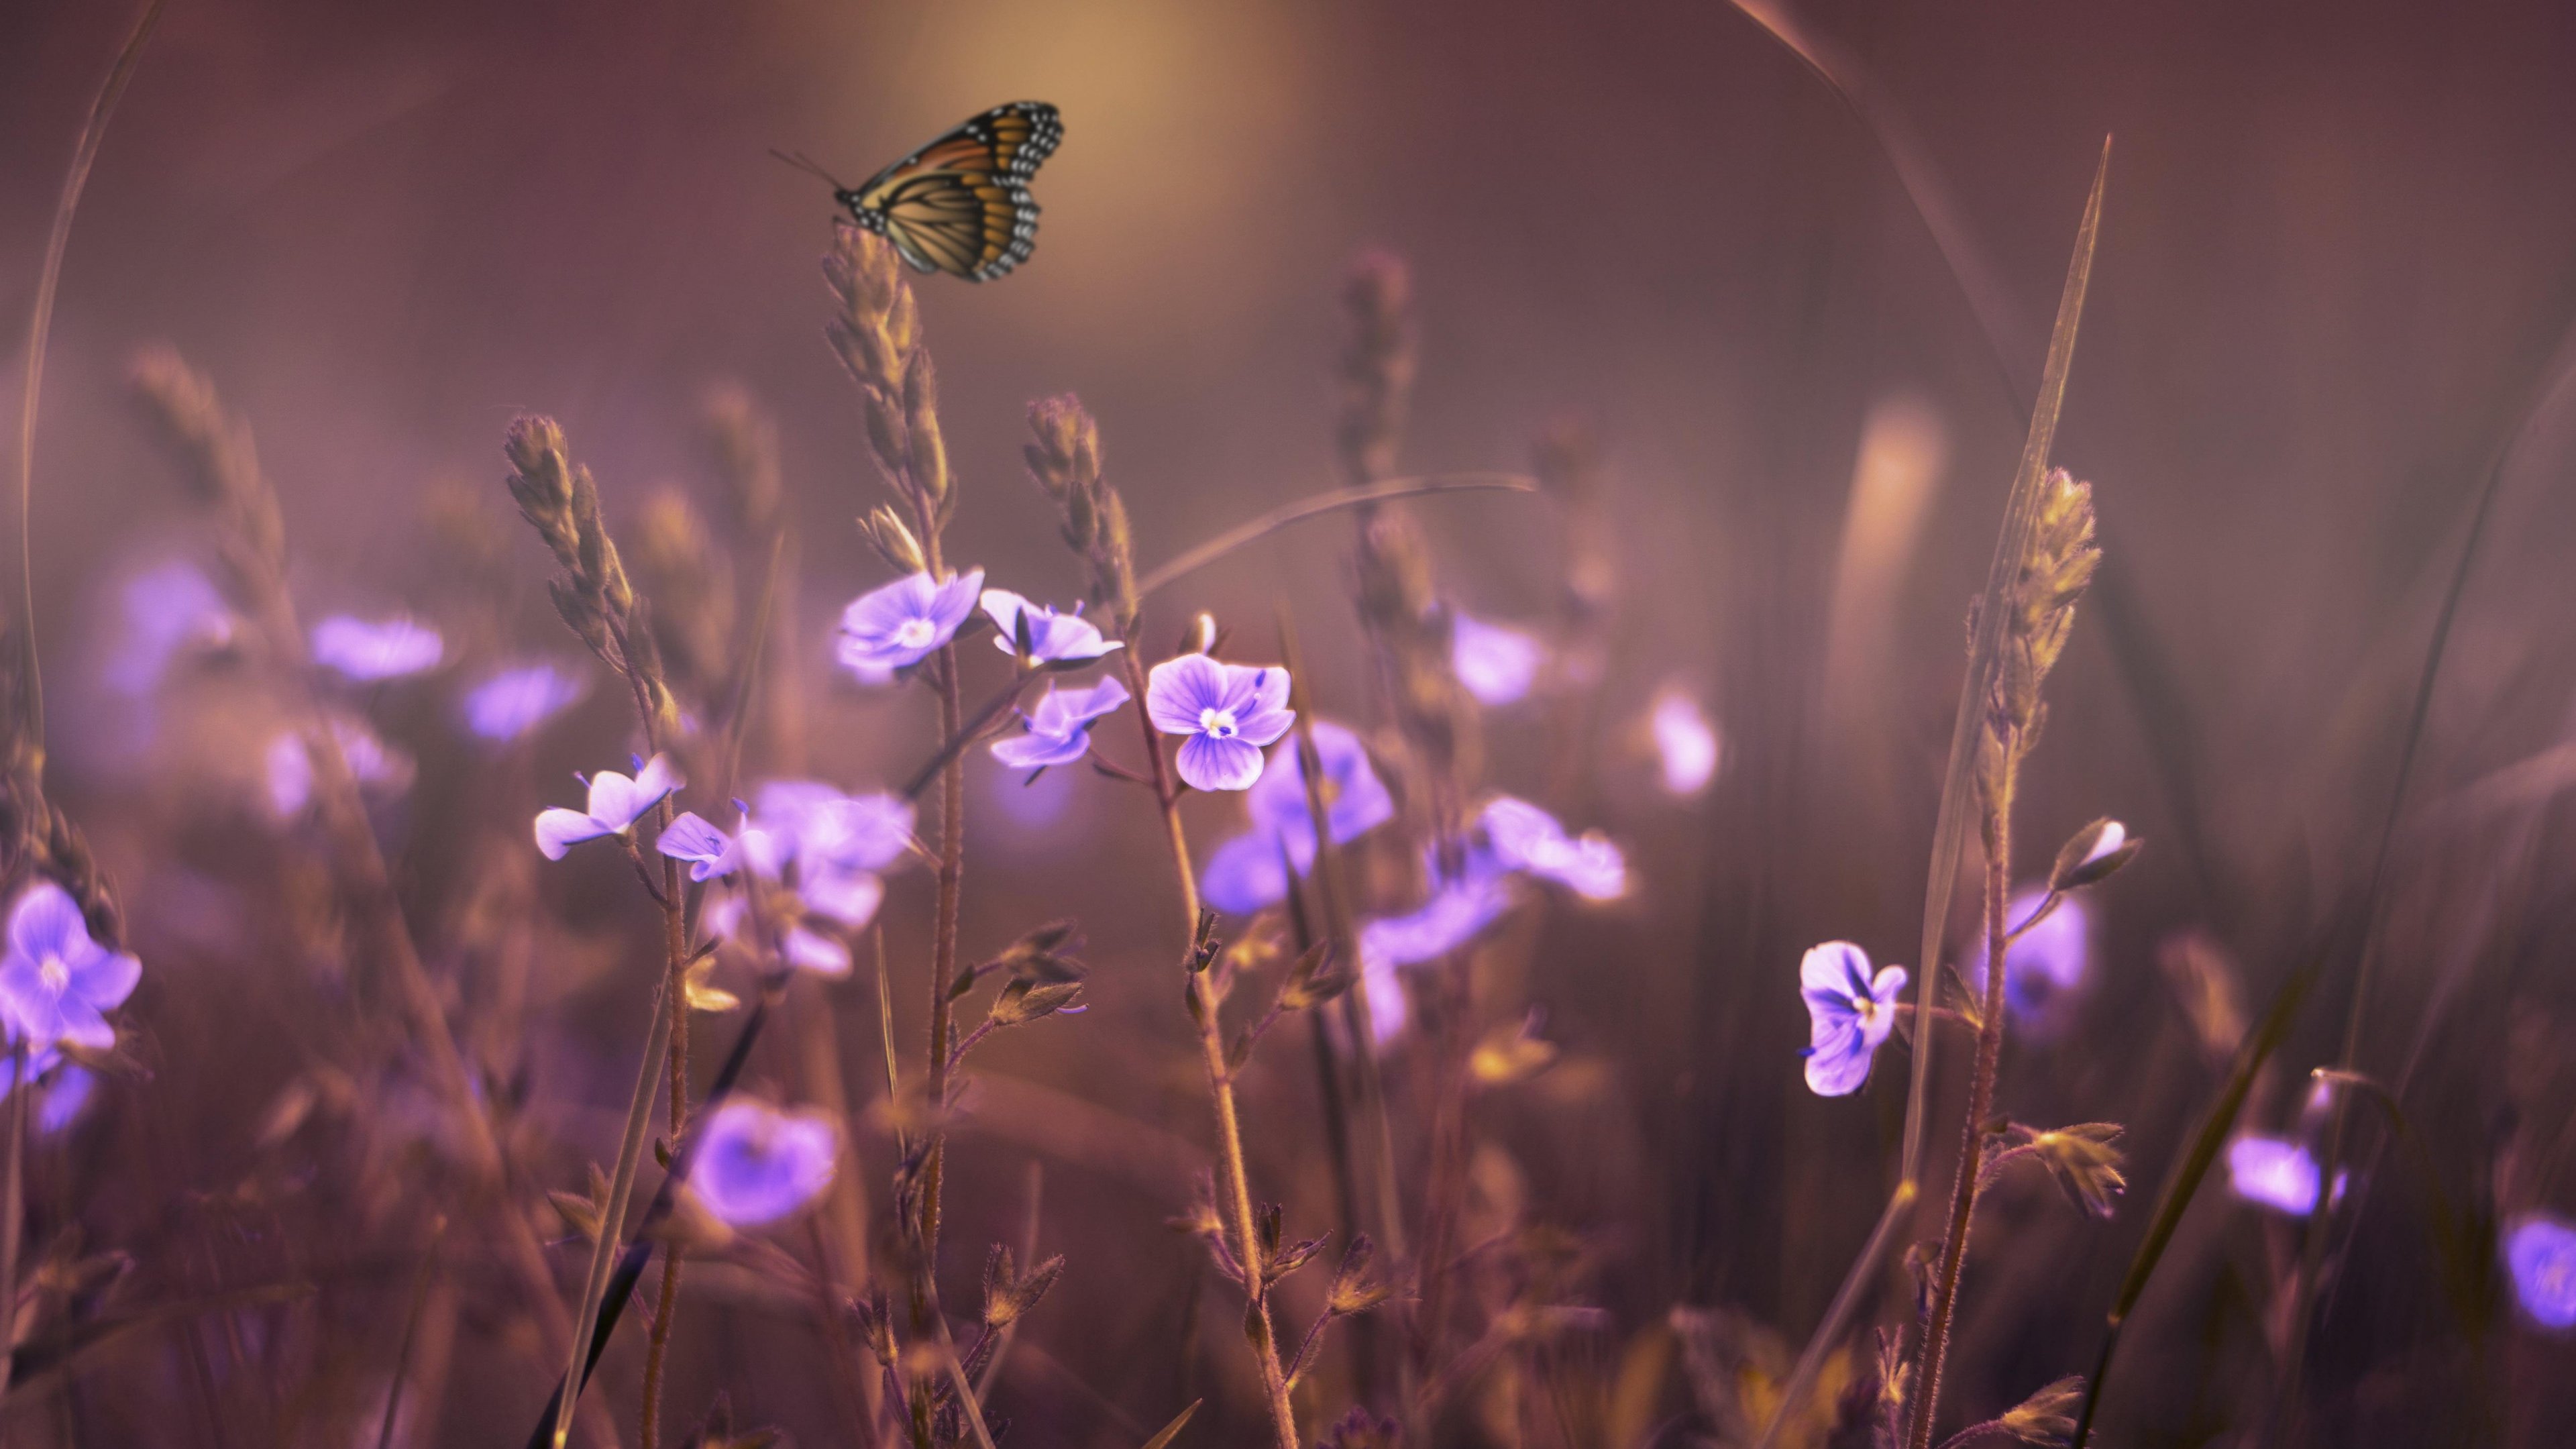 Butterfly on Purple Flowers Wallpaper - iPhone, Android & Desktop  Backgrounds